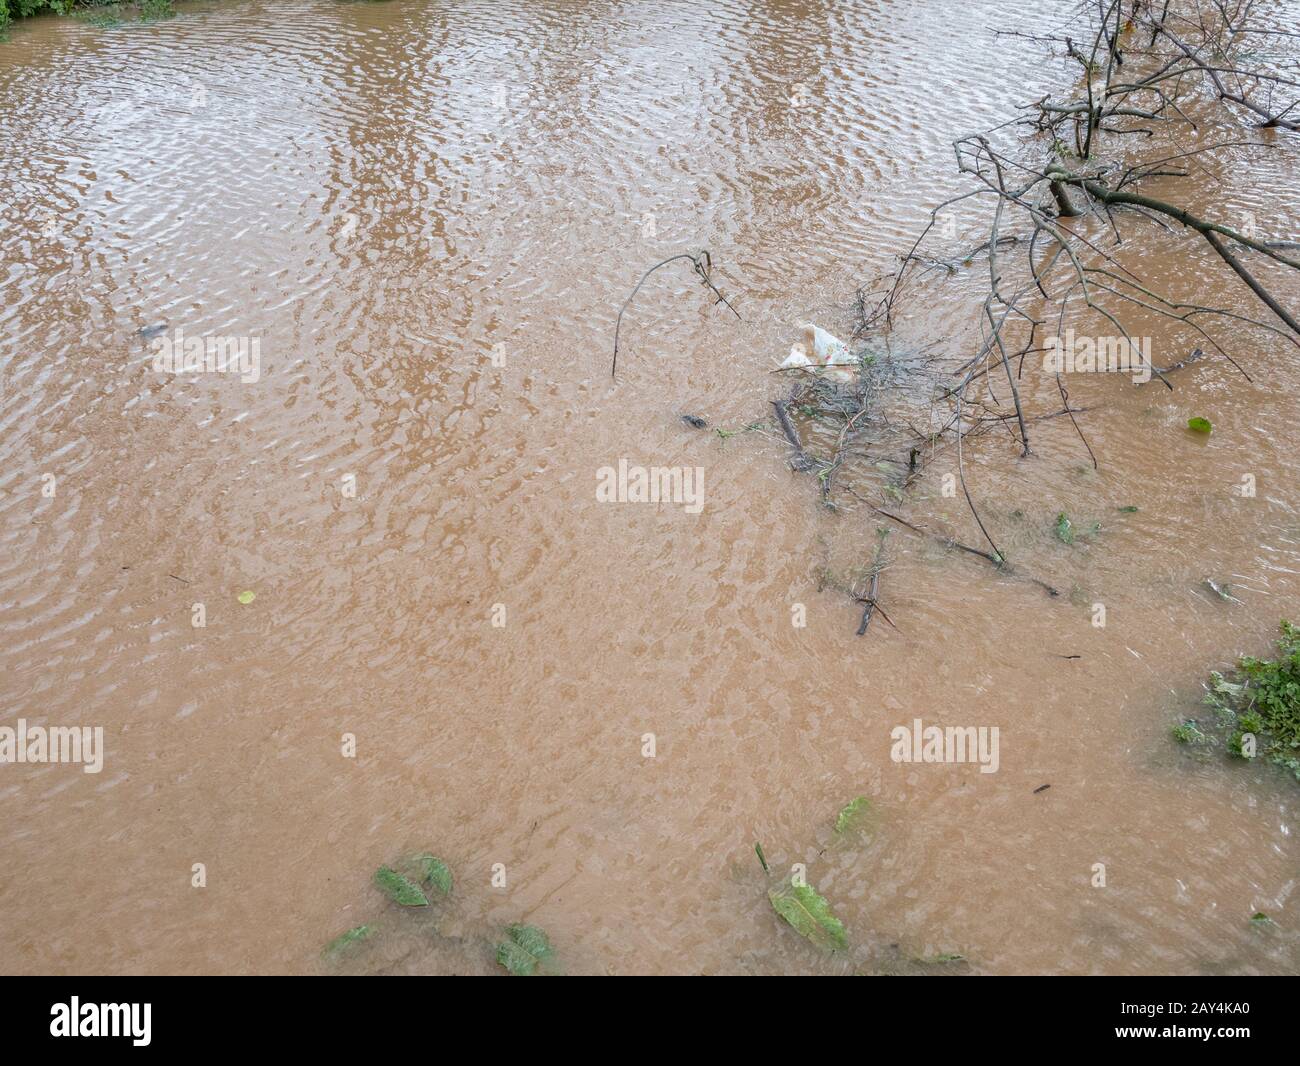 Empty plastic packaging wrapper floating in drainage ditch water after heavy winter rain. For war on plastic, plastic litter, rainy weather, murky. Stock Photo